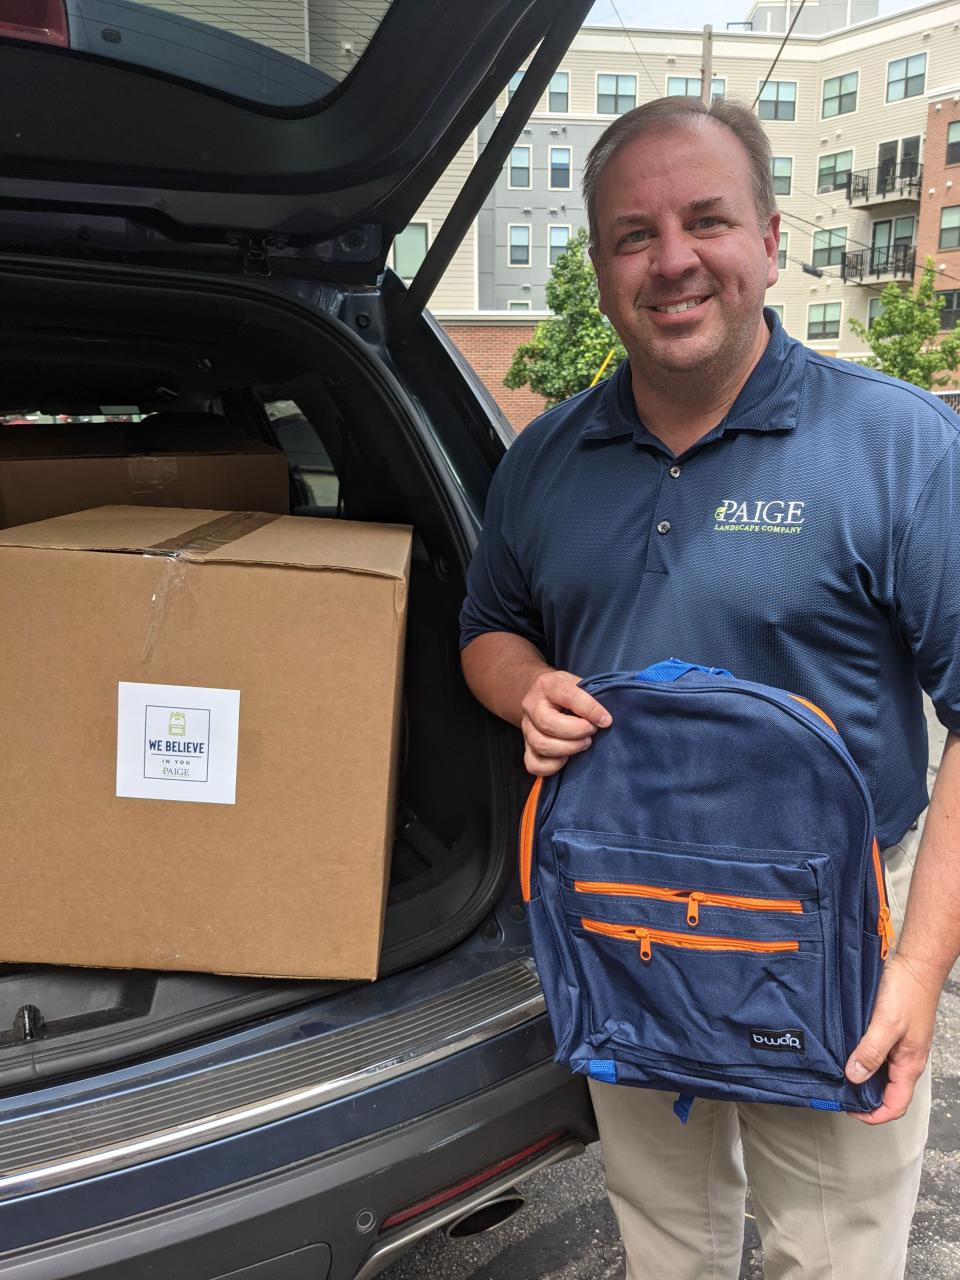 Brian Paige, of Paige Landscape Co., drops off more than 70 backpacks filled with supplies to Interfaith Social Services. Volunteers distributed more than 600 backpacks to the children of Interfaith’s food pantry clients in August.